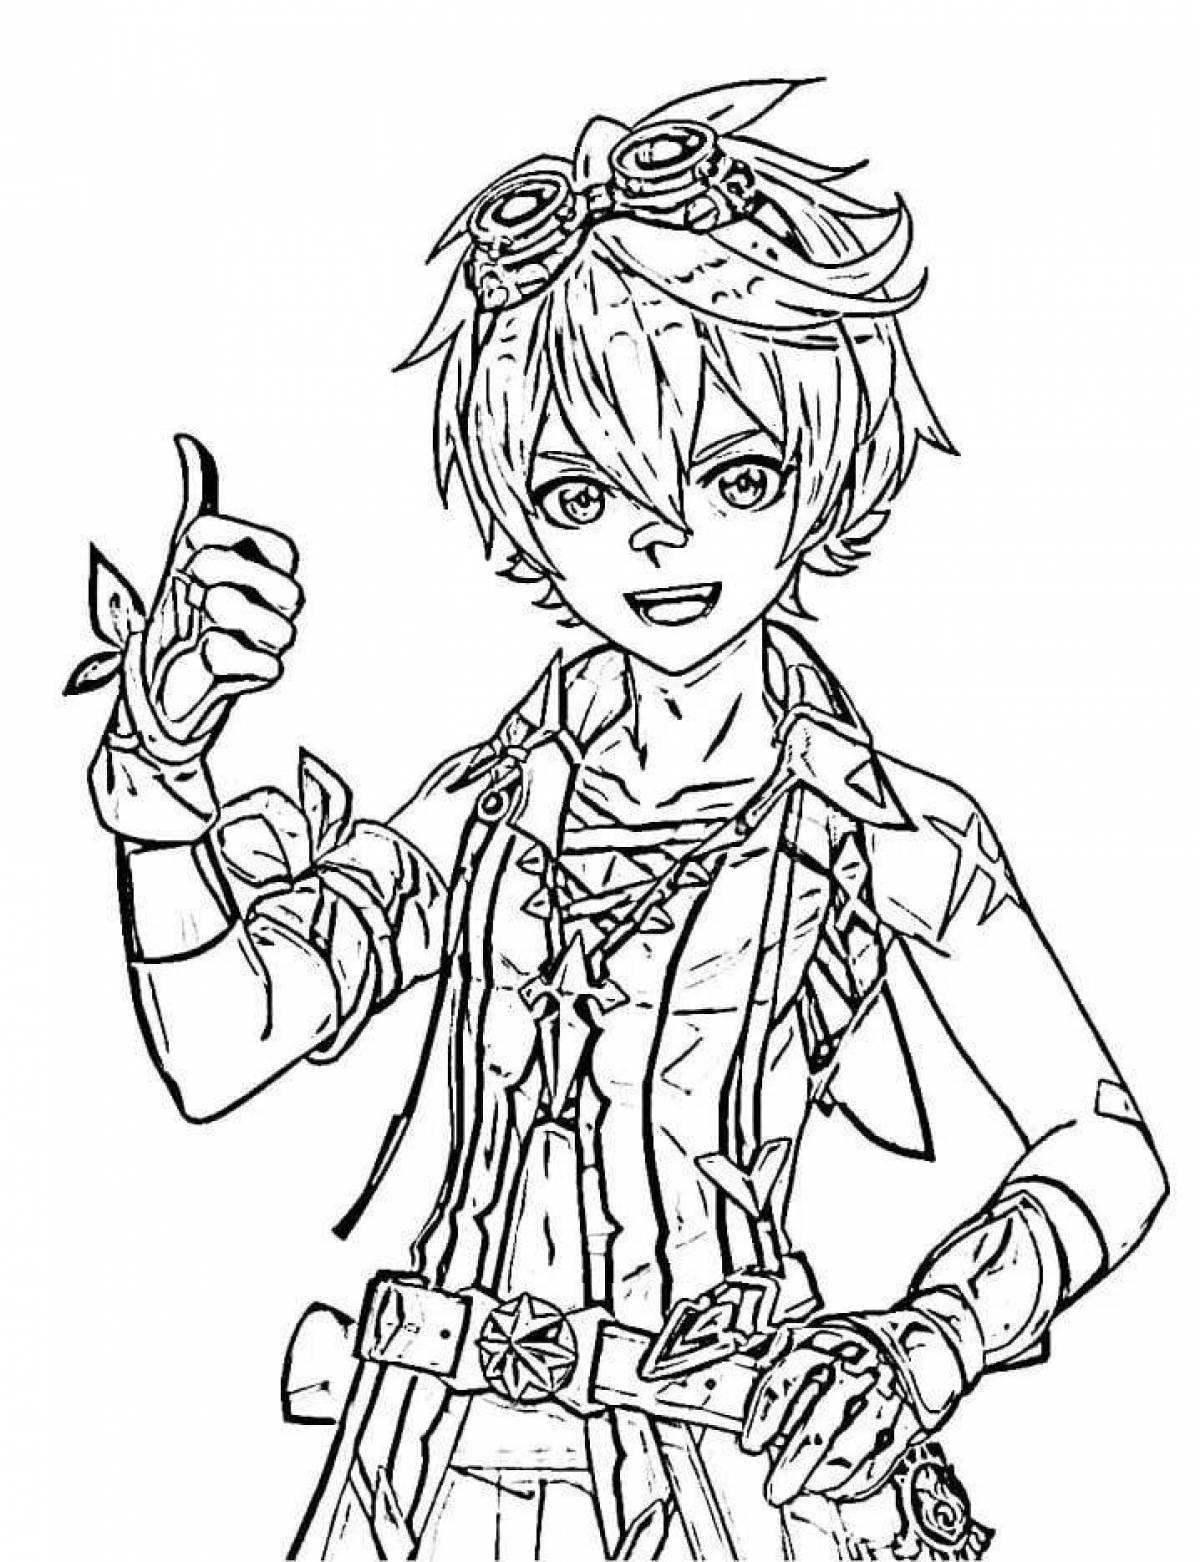 Coloring page cheerful genshin